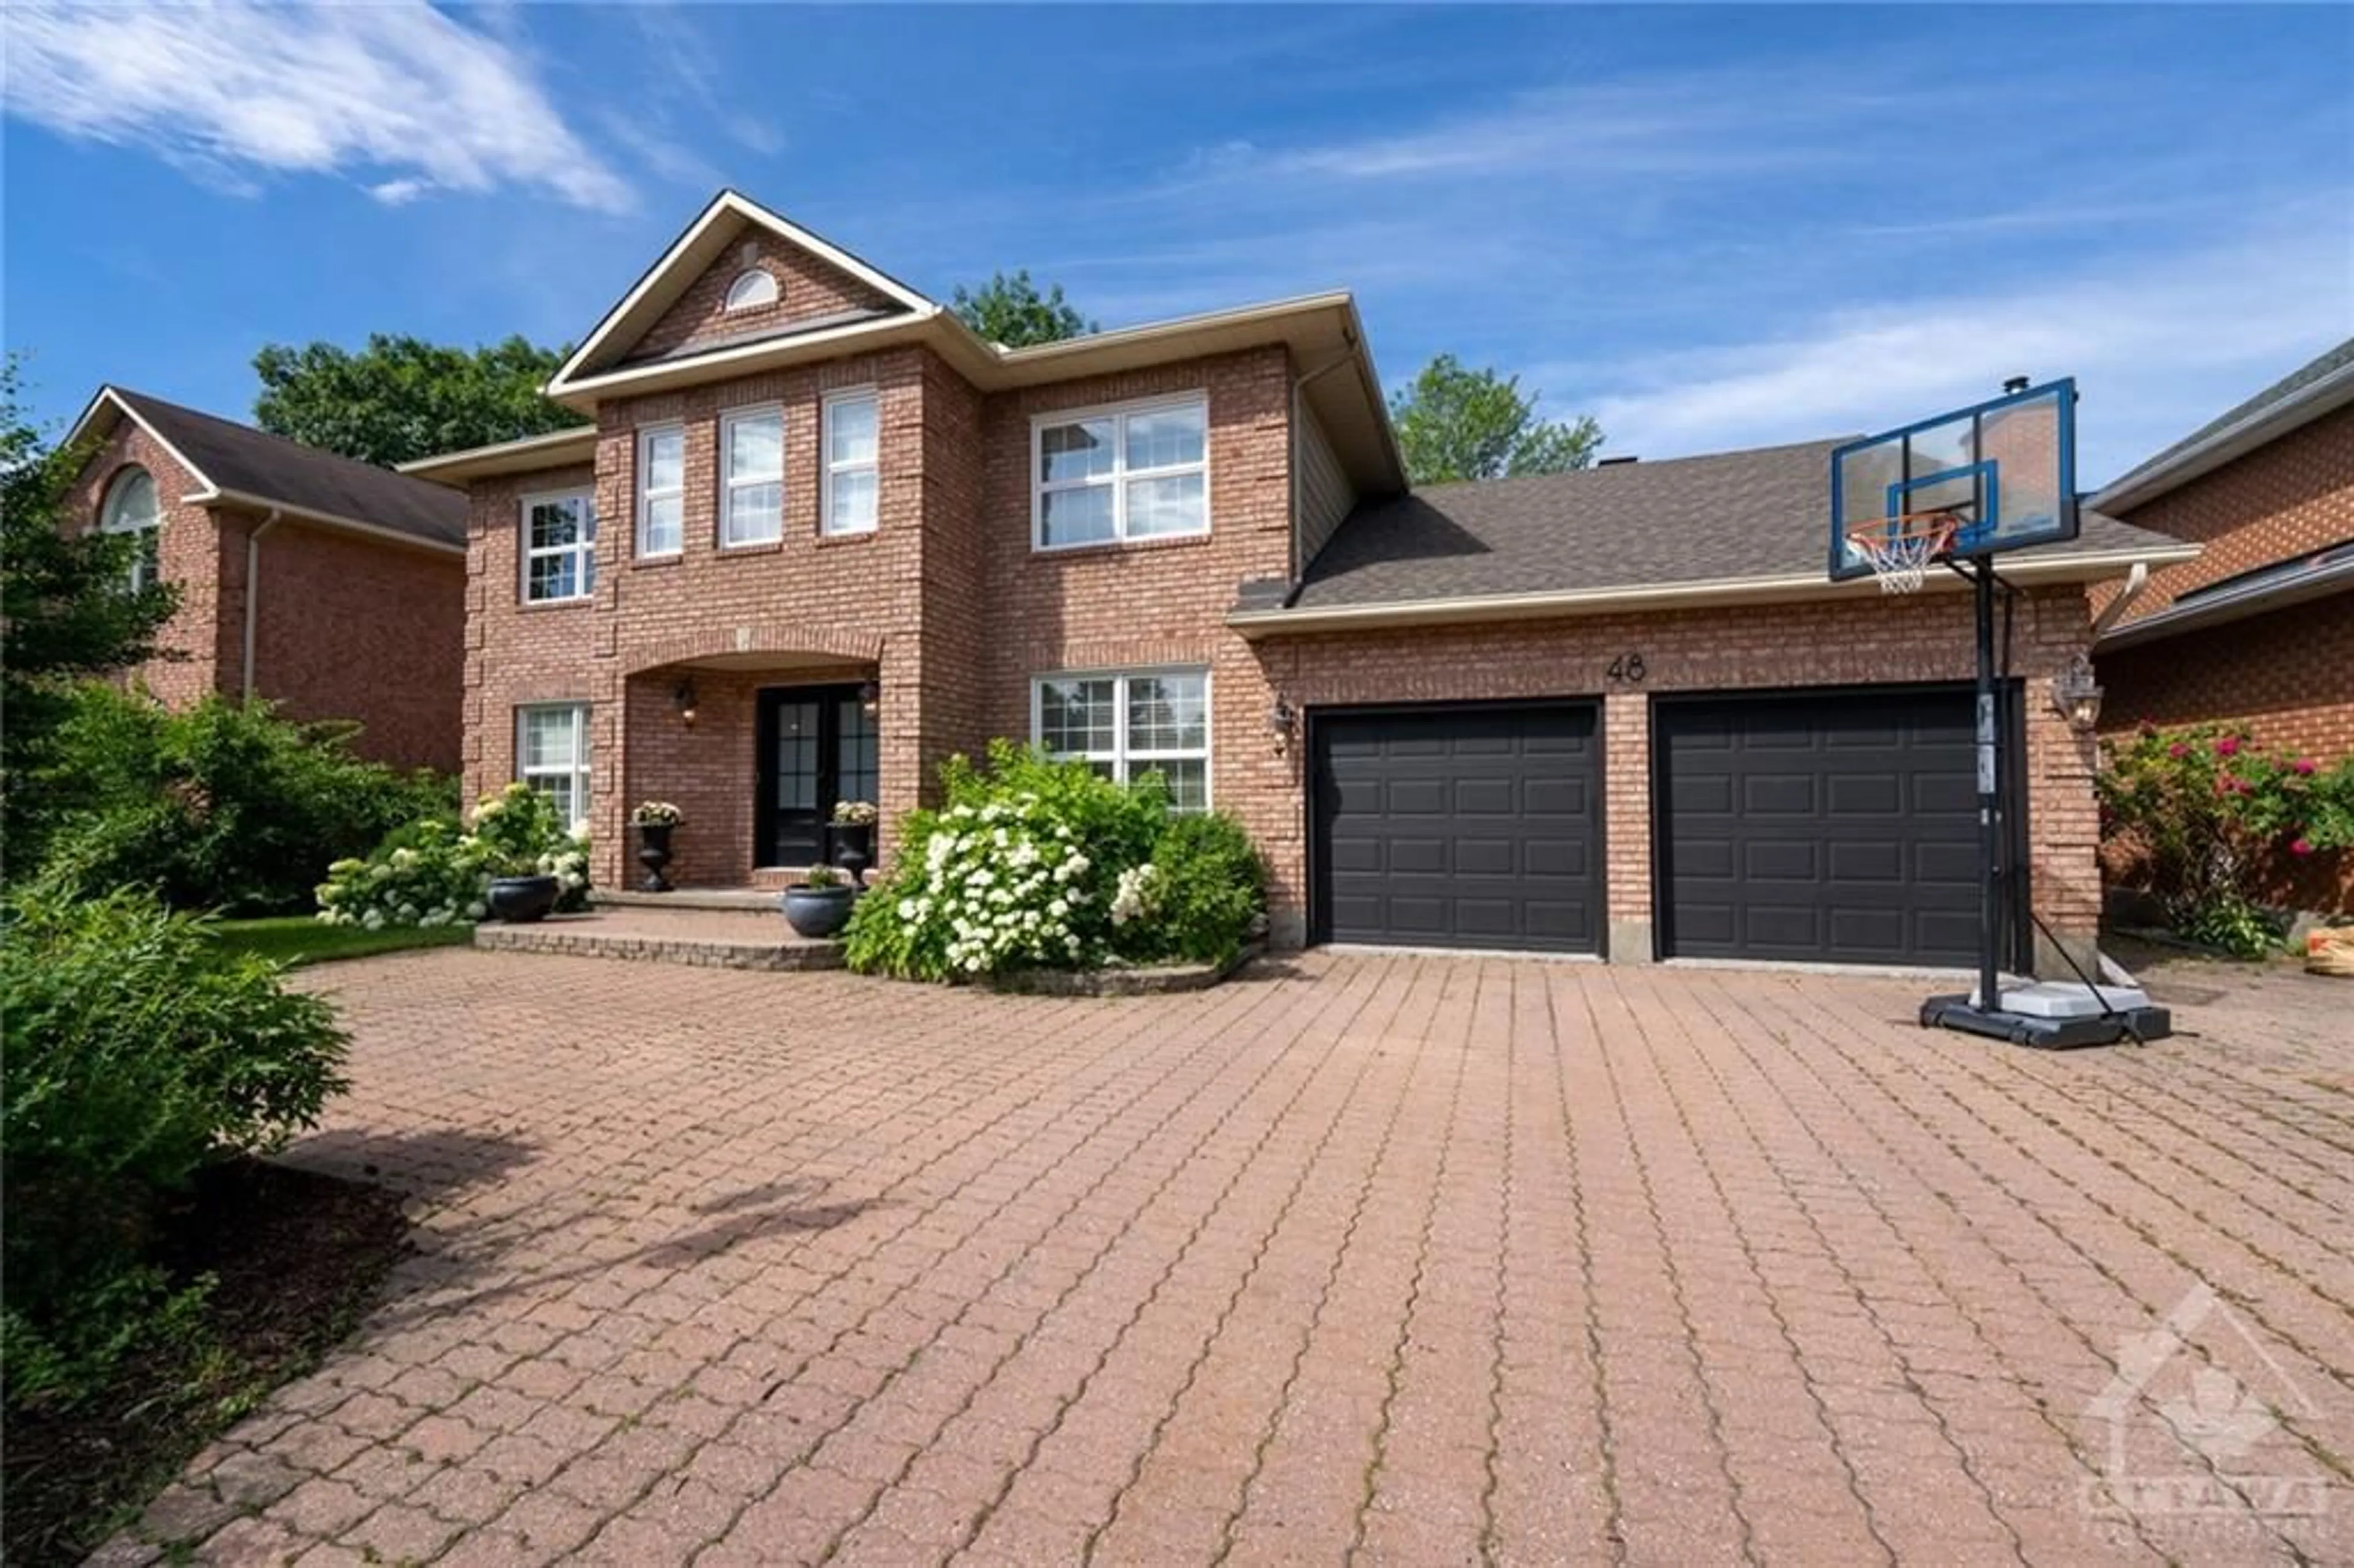 Home with brick exterior material for 48 MARBLE ARCH Cres, Ottawa Ontario K2G 5S6